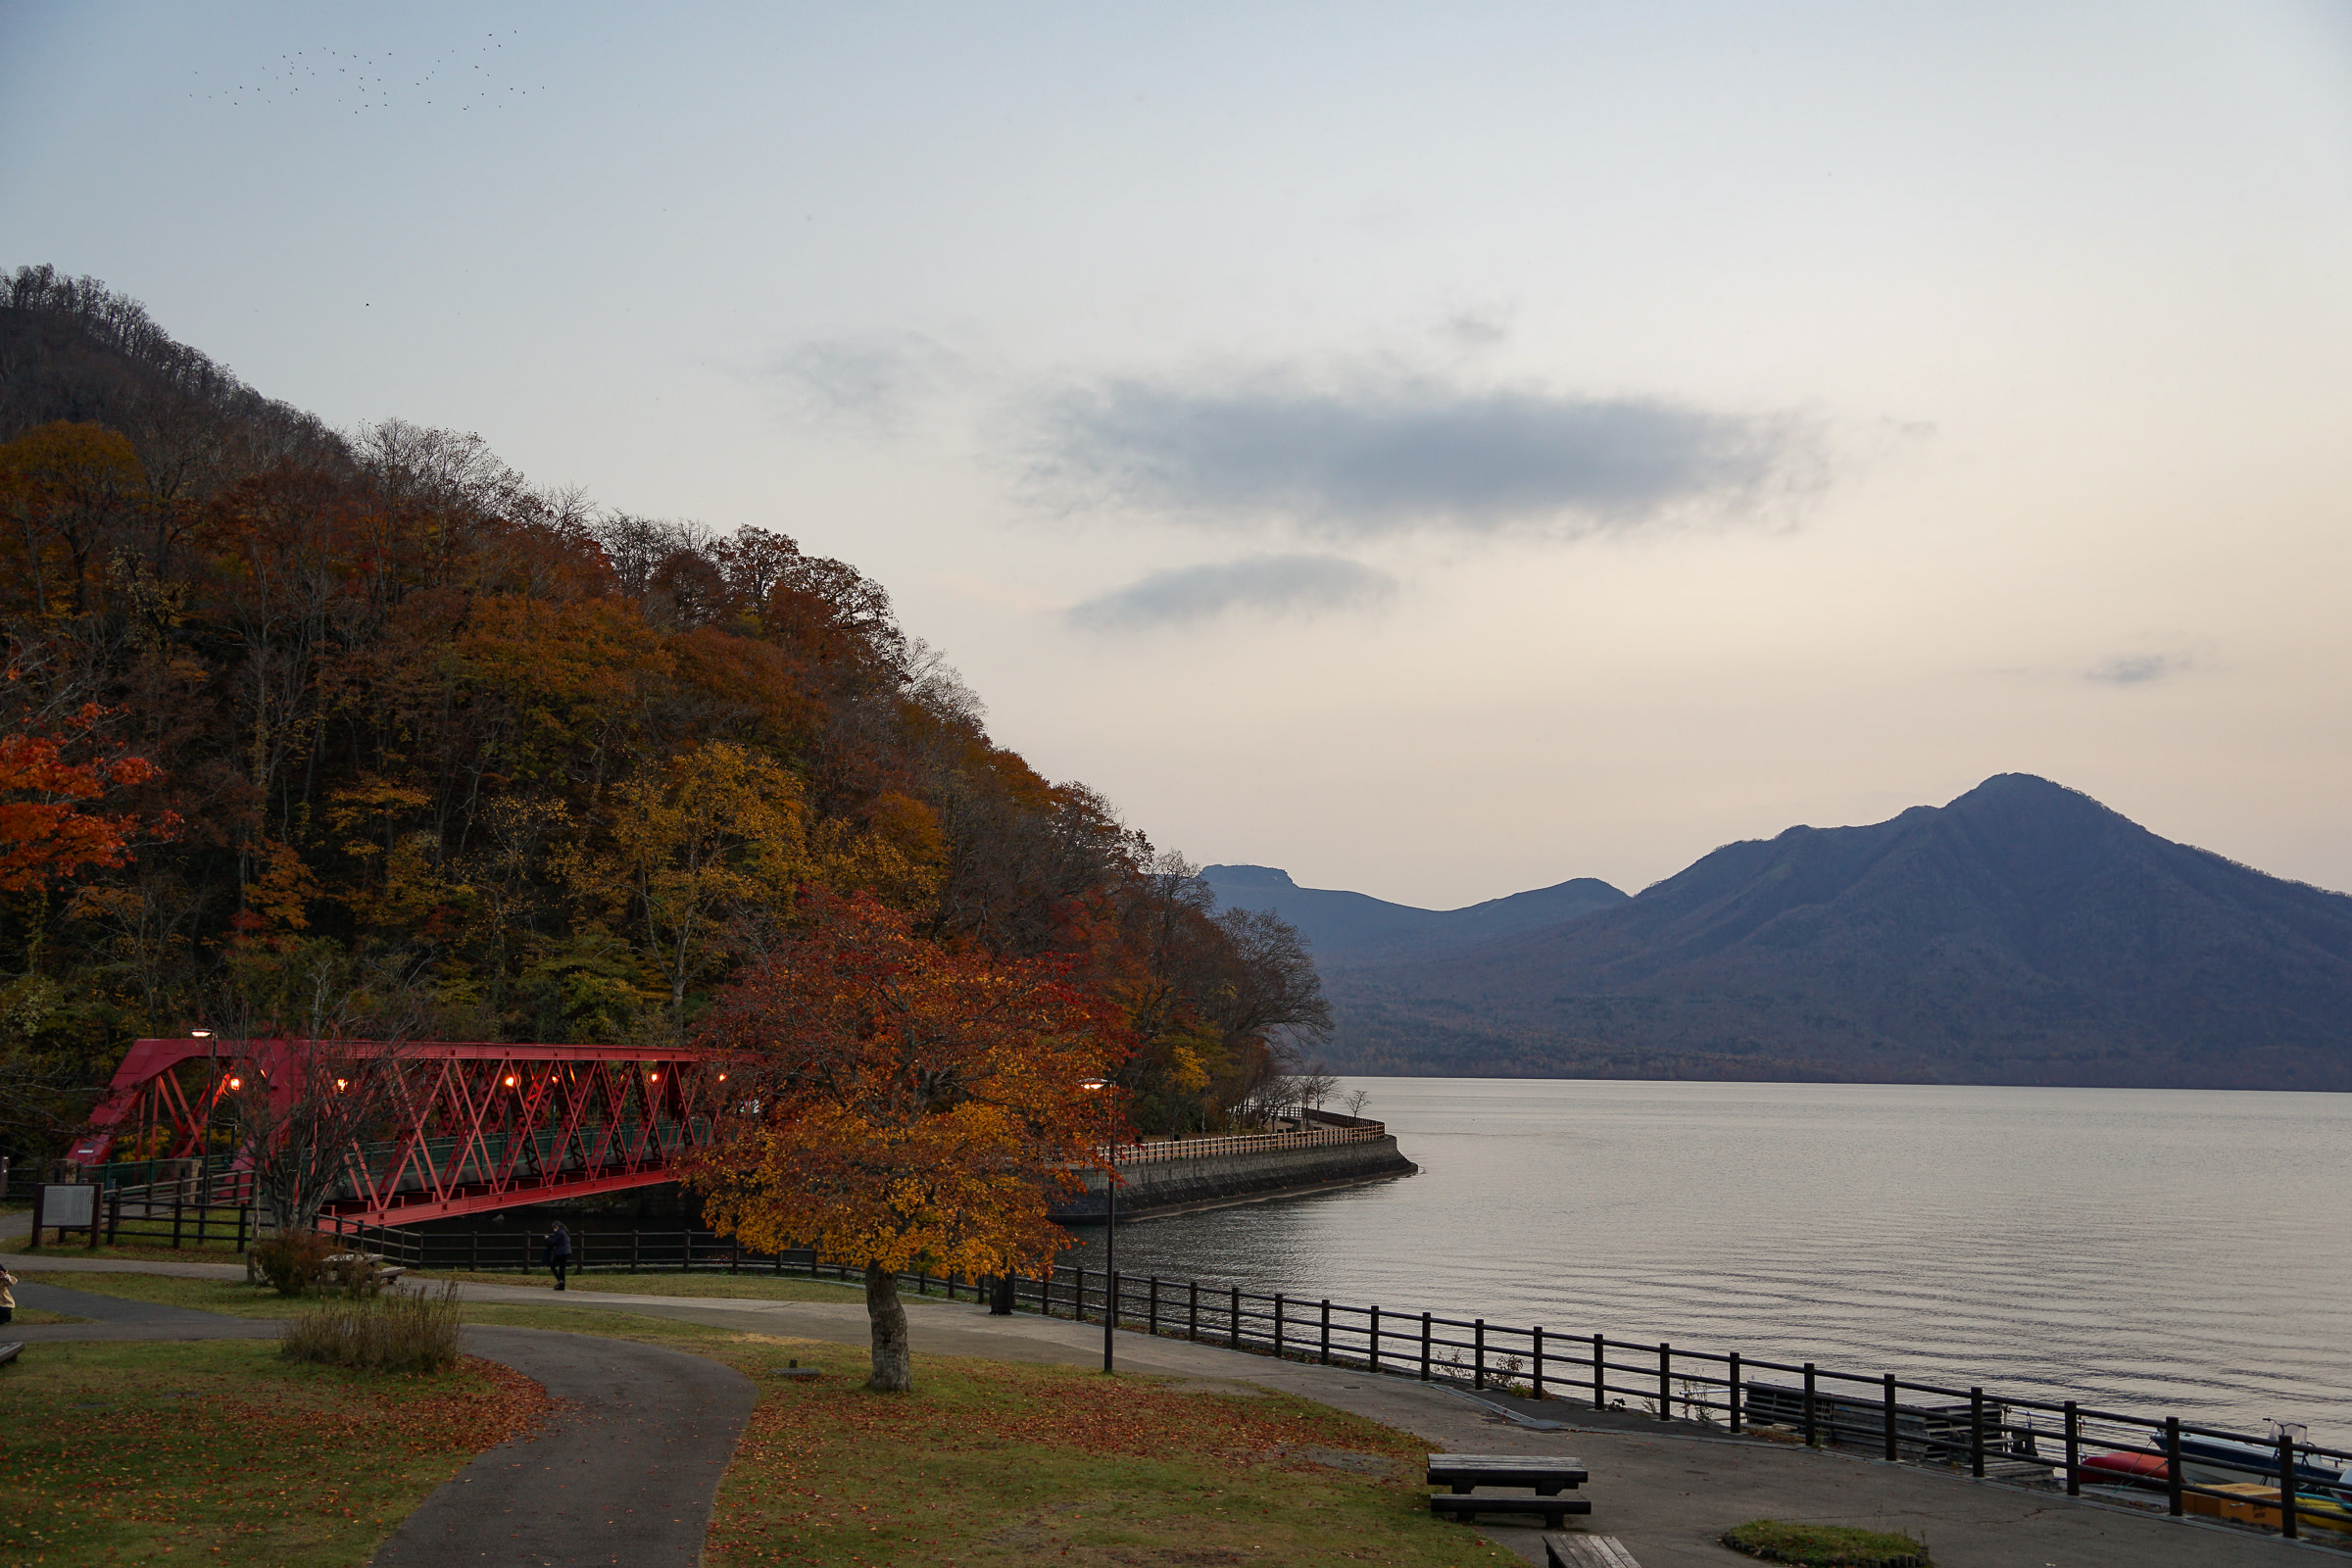 A park on the lakeside of Lake Shikotsu. A red iron bridge to the left leads into a small, forested area.